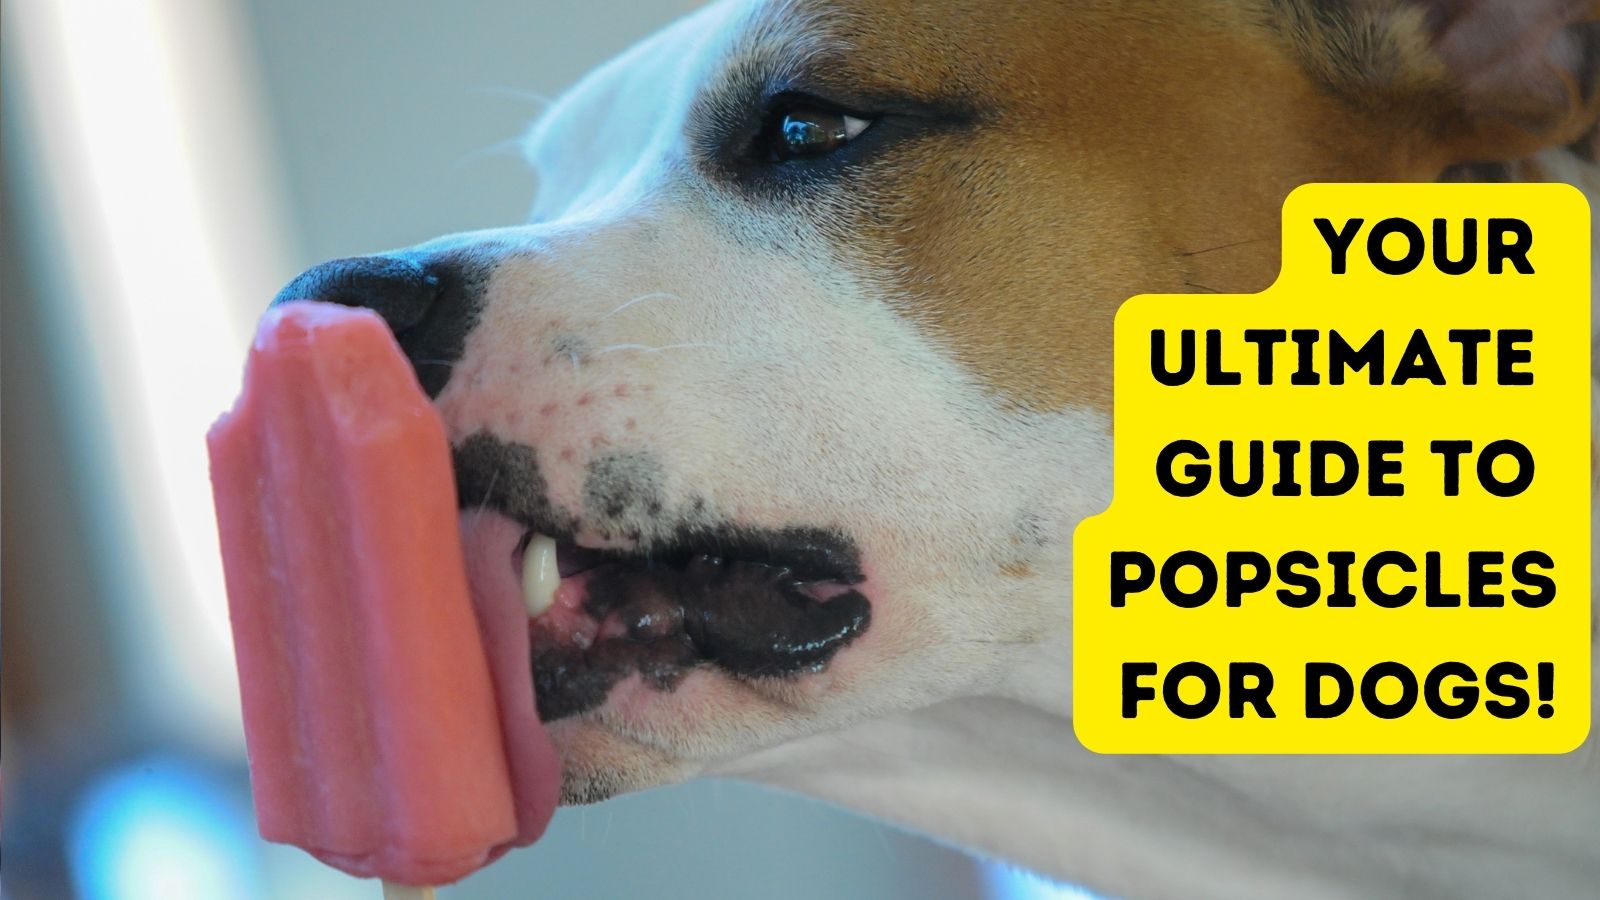 https://www.dogtipper.com/wp-content/uploads/2022/07/Your-Ultimate-Guide-to-Popsicles-for-Dogs.jpg